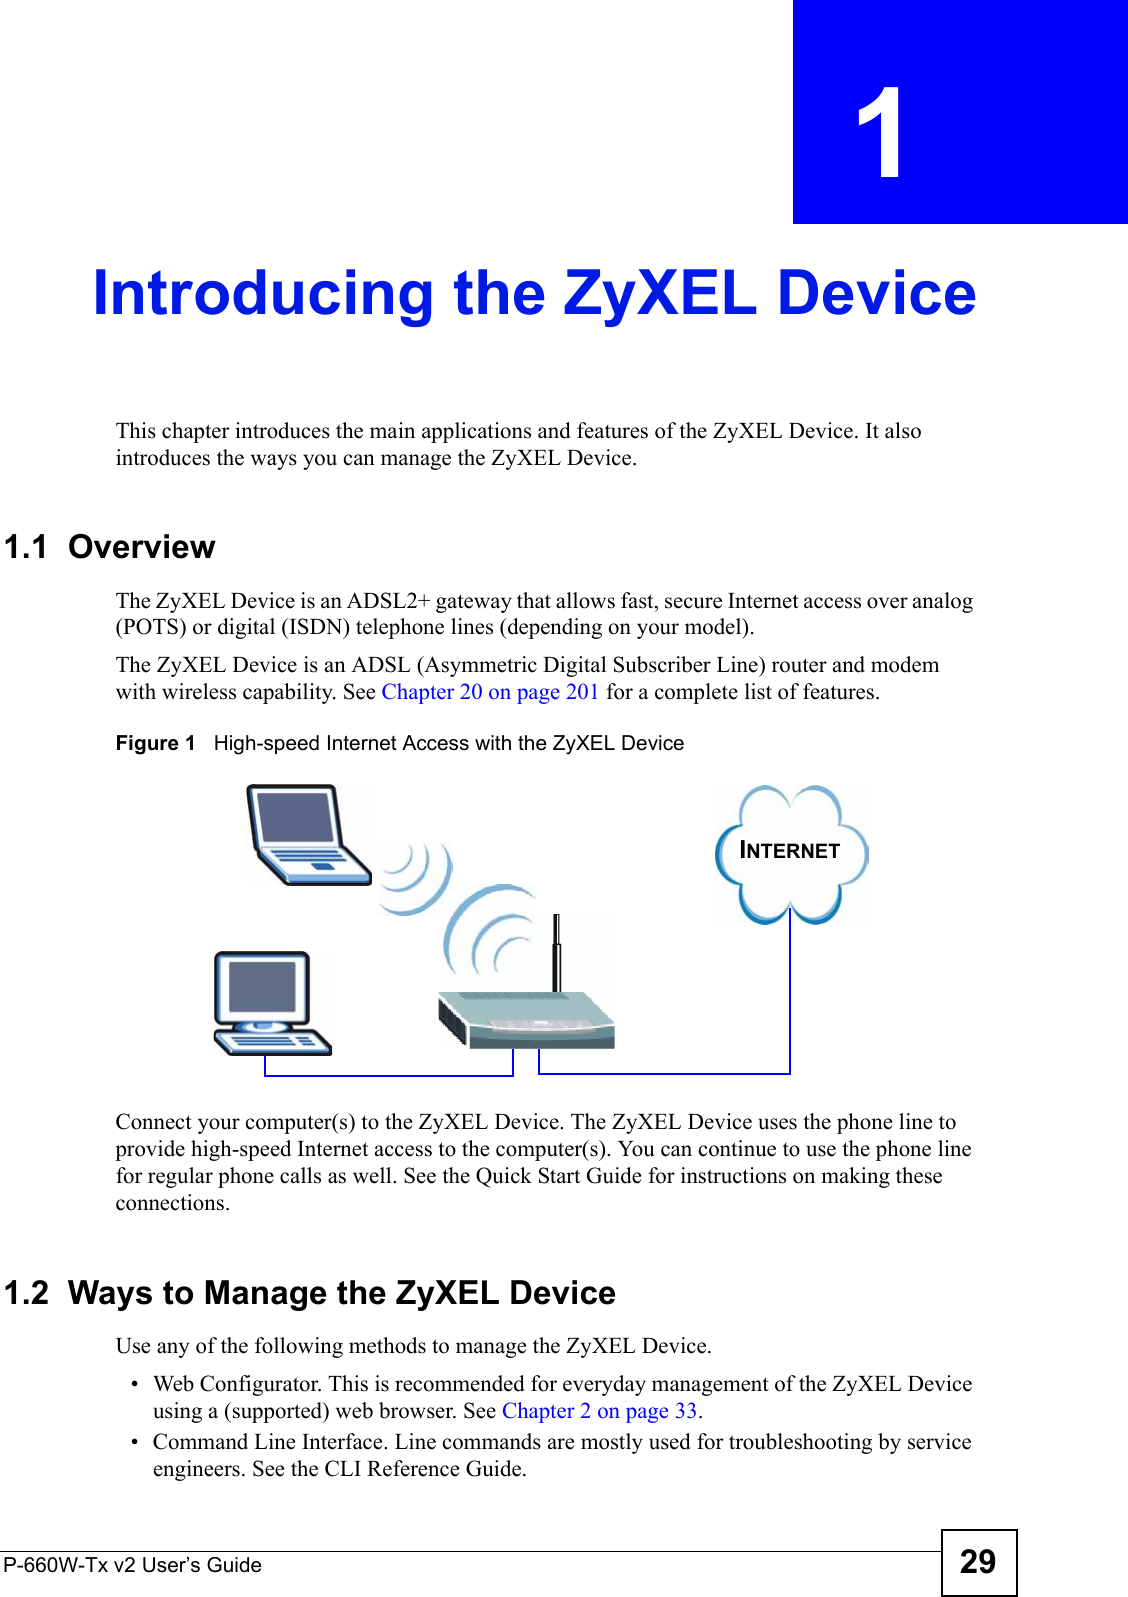 P-660W-Tx v2 User’s Guide 29CHAPTER  1 Introducing the ZyXEL DeviceThis chapter introduces the main applications and features of the ZyXEL Device. It also introduces the ways you can manage the ZyXEL Device.1.1  OverviewThe ZyXEL Device is an ADSL2+ gateway that allows fast, secure Internet access over analog (POTS) or digital (ISDN) telephone lines (depending on your model).The ZyXEL Device is an ADSL (Asymmetric Digital Subscriber Line) router and modem with wireless capability. See Chapter 20 on page 201 for a complete list of features.Figure 1   High-speed Internet Access with the ZyXEL DeviceConnect your computer(s) to the ZyXEL Device. The ZyXEL Device uses the phone line to provide high-speed Internet access to the computer(s). You can continue to use the phone line for regular phone calls as well. See the Quick Start Guide for instructions on making these connections.1.2  Ways to Manage the ZyXEL DeviceUse any of the following methods to manage the ZyXEL Device.• Web Configurator. This is recommended for everyday management of the ZyXEL Device using a (supported) web browser. See Chapter 2 on page 33. • Command Line Interface. Line commands are mostly used for troubleshooting by service engineers. See the CLI Reference Guide.INTERNET